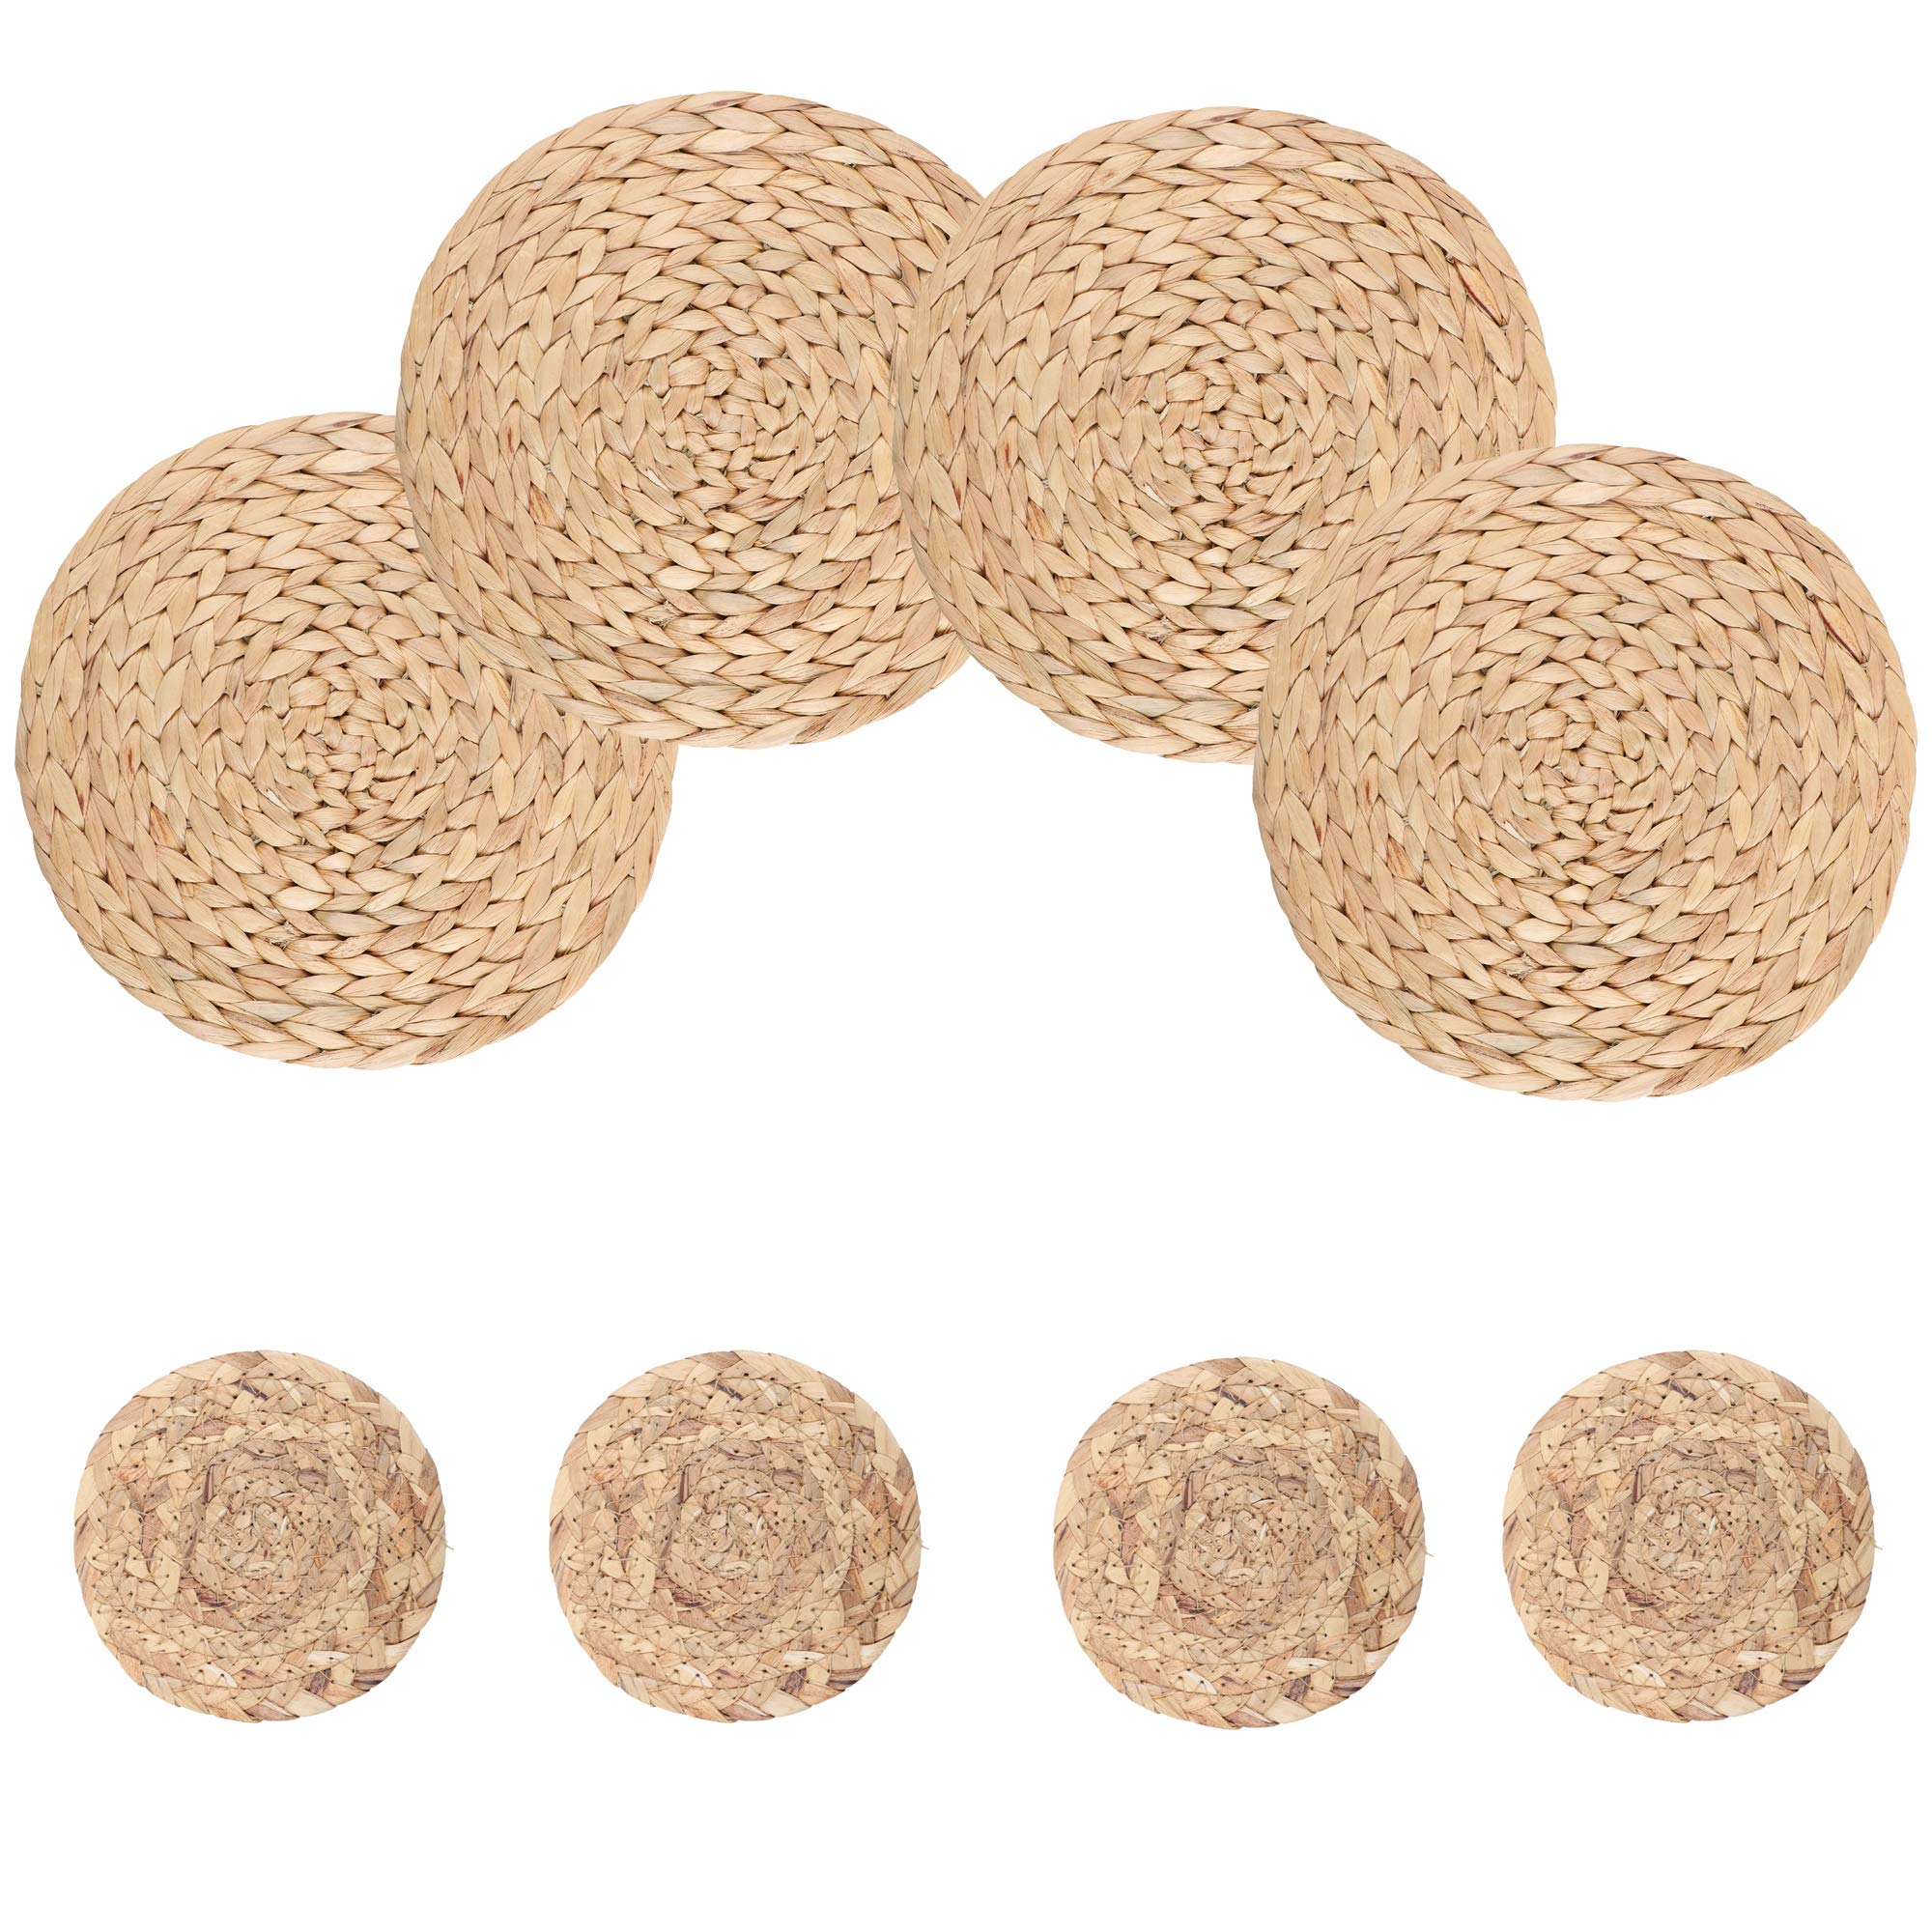 Aonewoe Water Hyacinth Weave Placemats and Coasters Round Handmade Natural Grass Woven Place Mats Heat Resistant Non-slip Pot Mats 30cm, Set of 8 (4 Placemats & 4 Coasters)